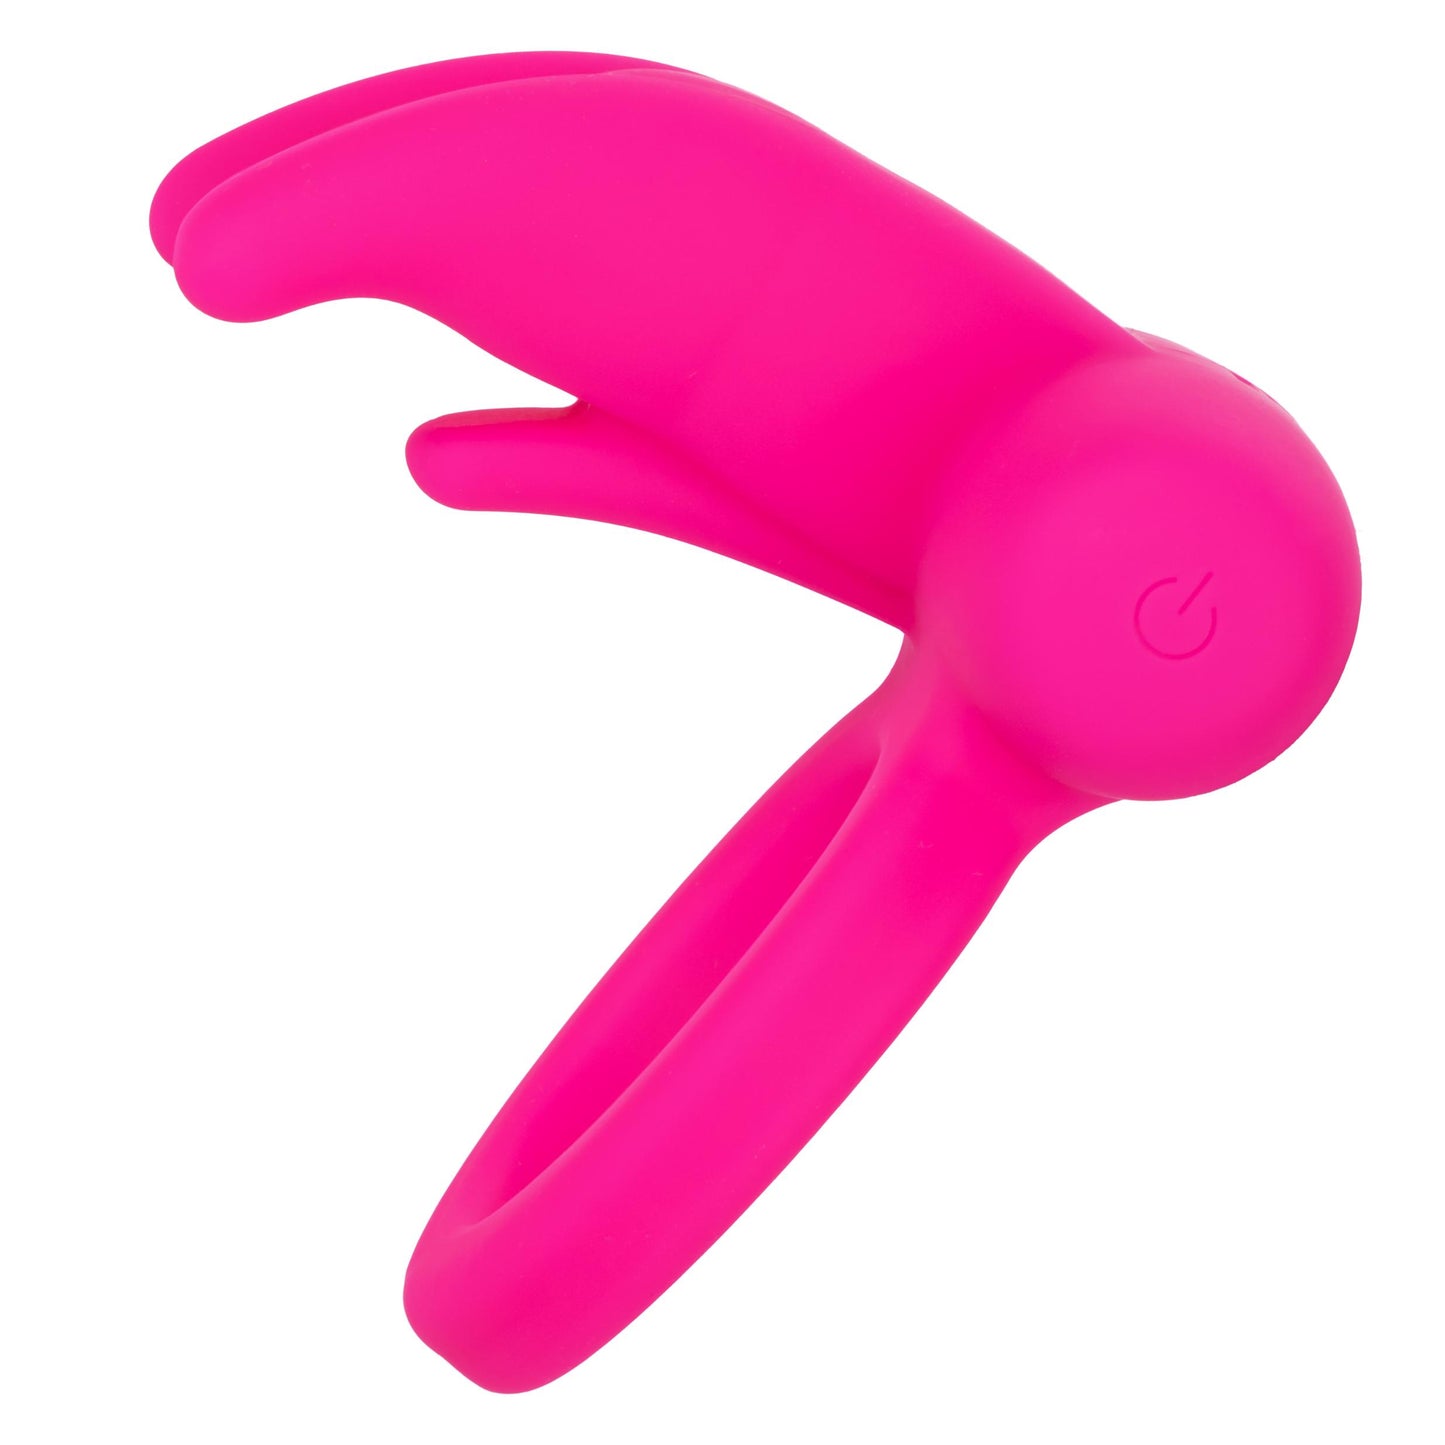 Silicone Rechargeable Triple Clit Flicker